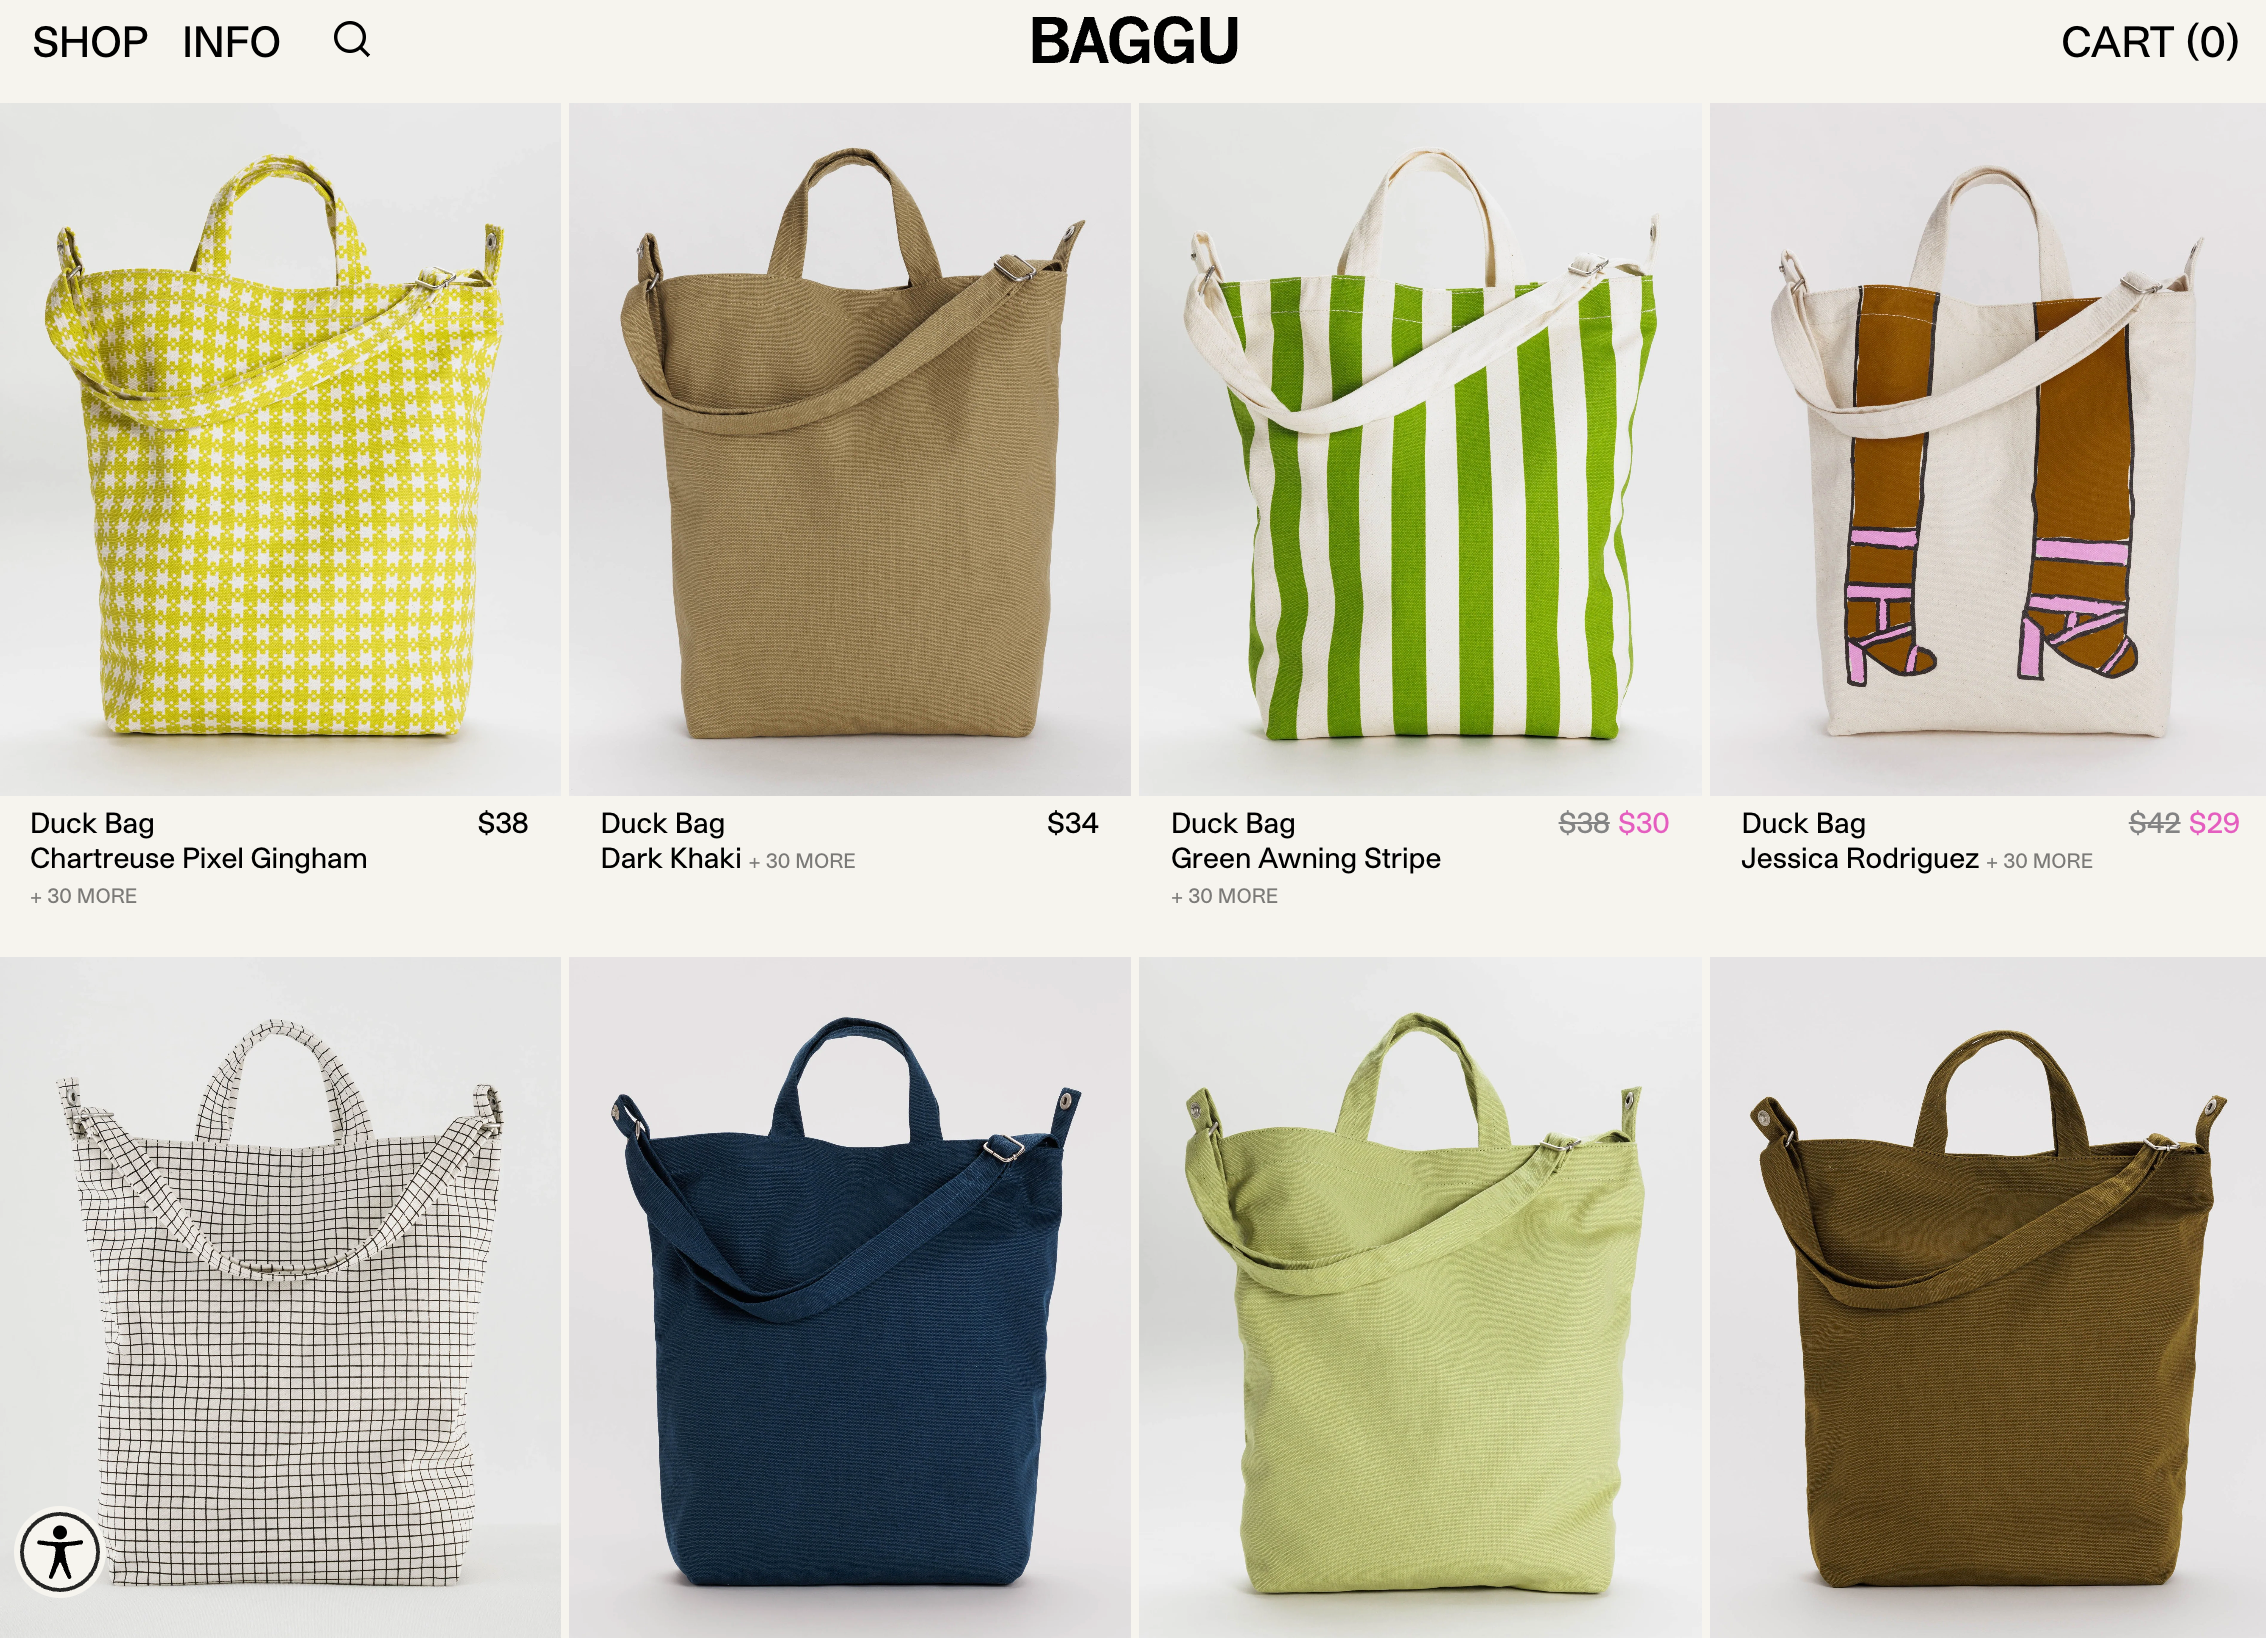 A product collection page from Baggu's website